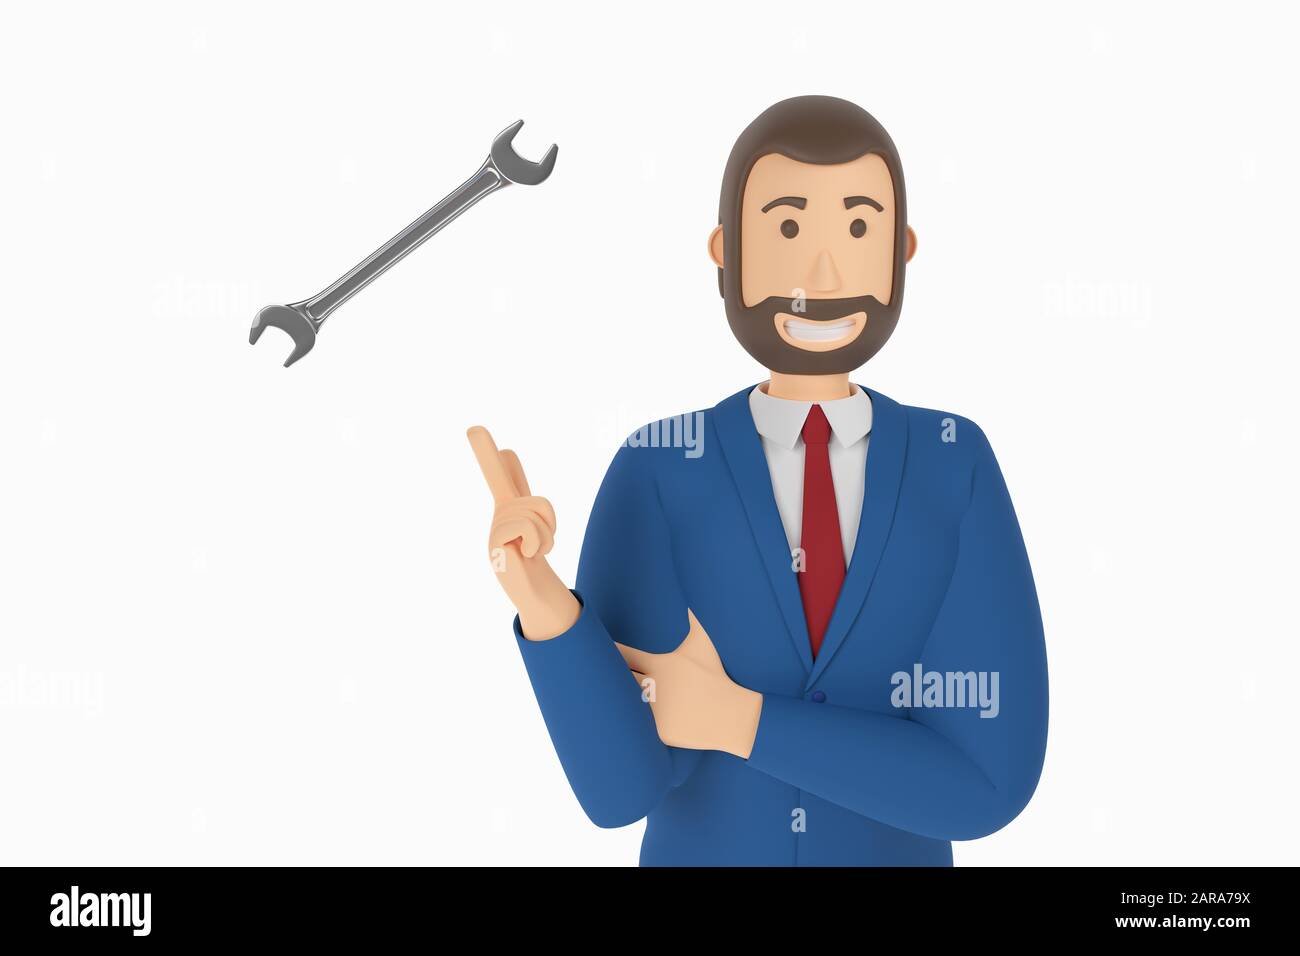 Cartoon character, businessman in suit with pointing finger at wrench. Concept icon with wrench, service. 3d rendering Stock Photo